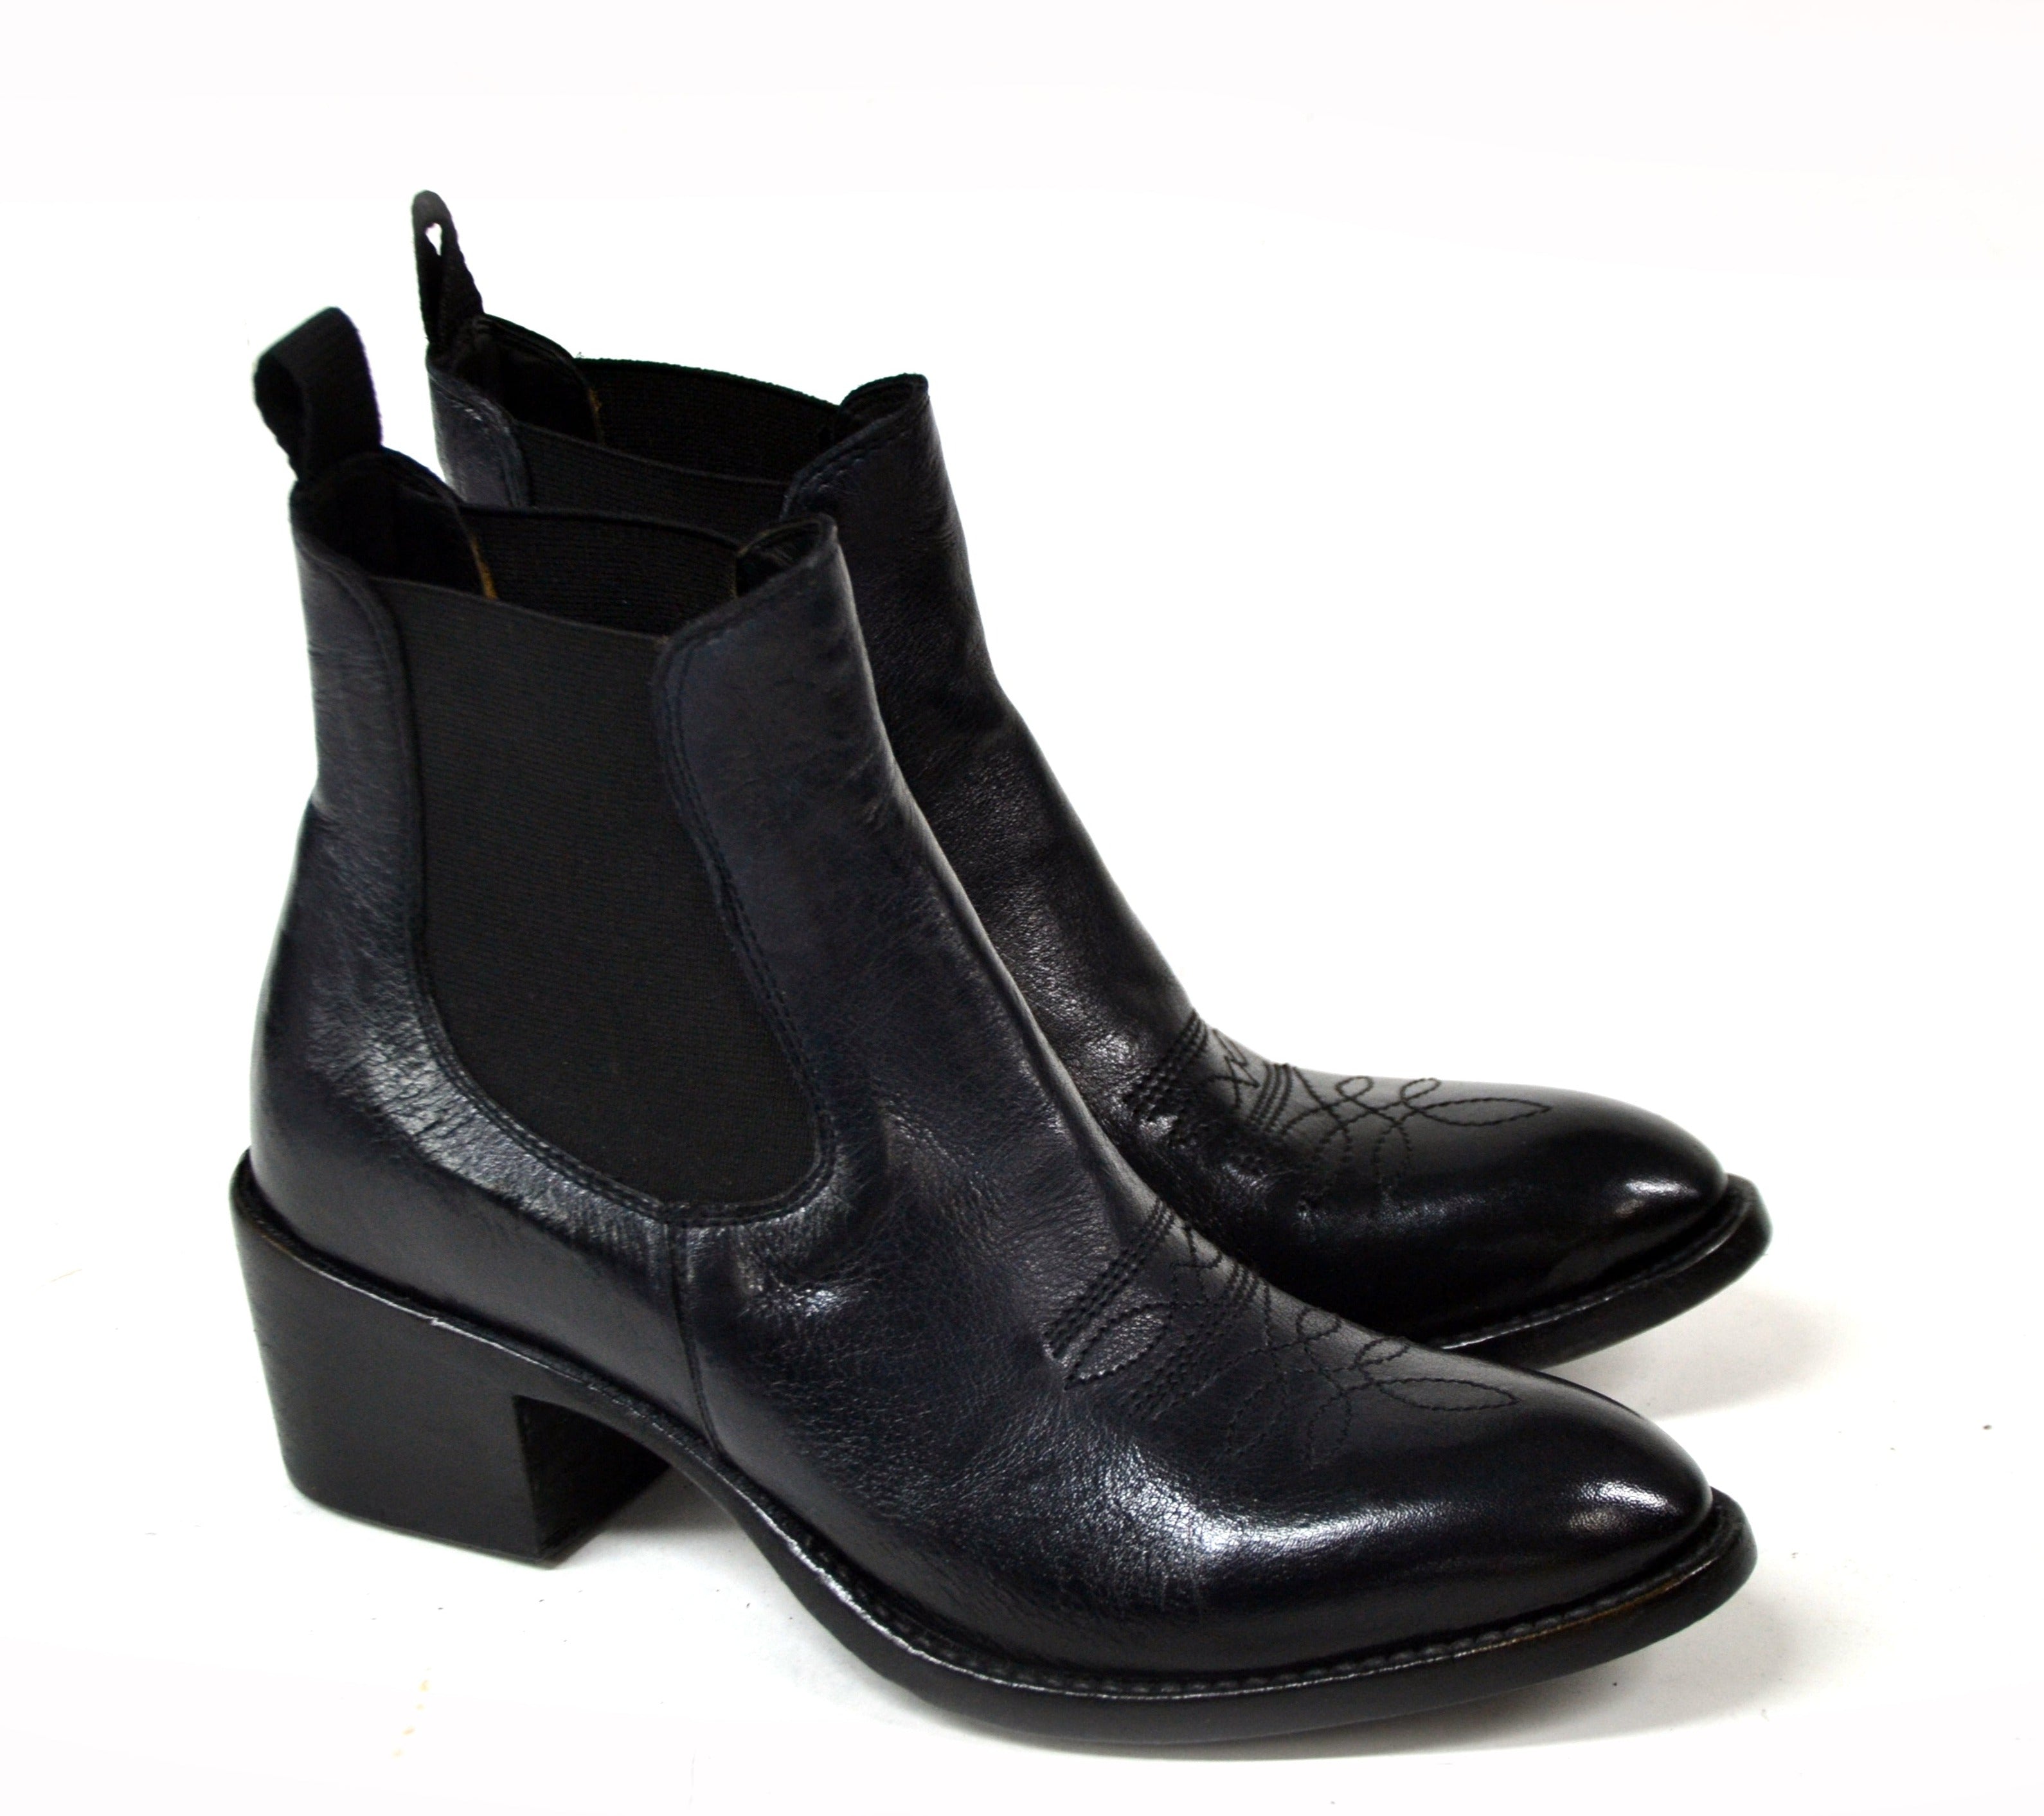 PEGGY LOW BLACK BOOTS